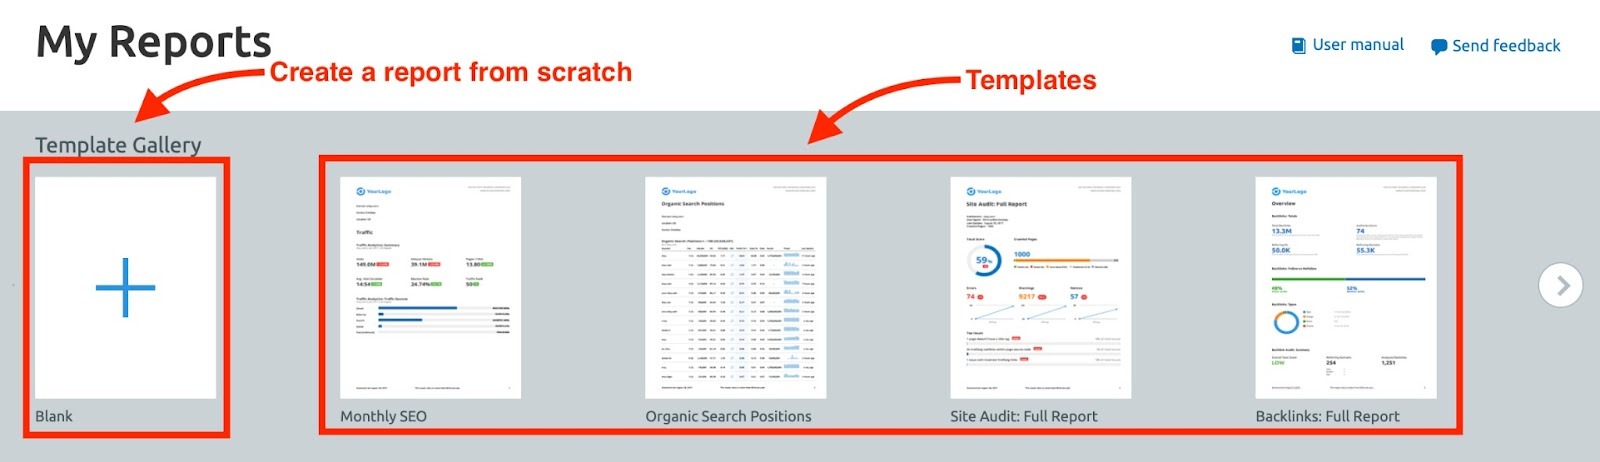 Building a Pitch in Semrush image 1